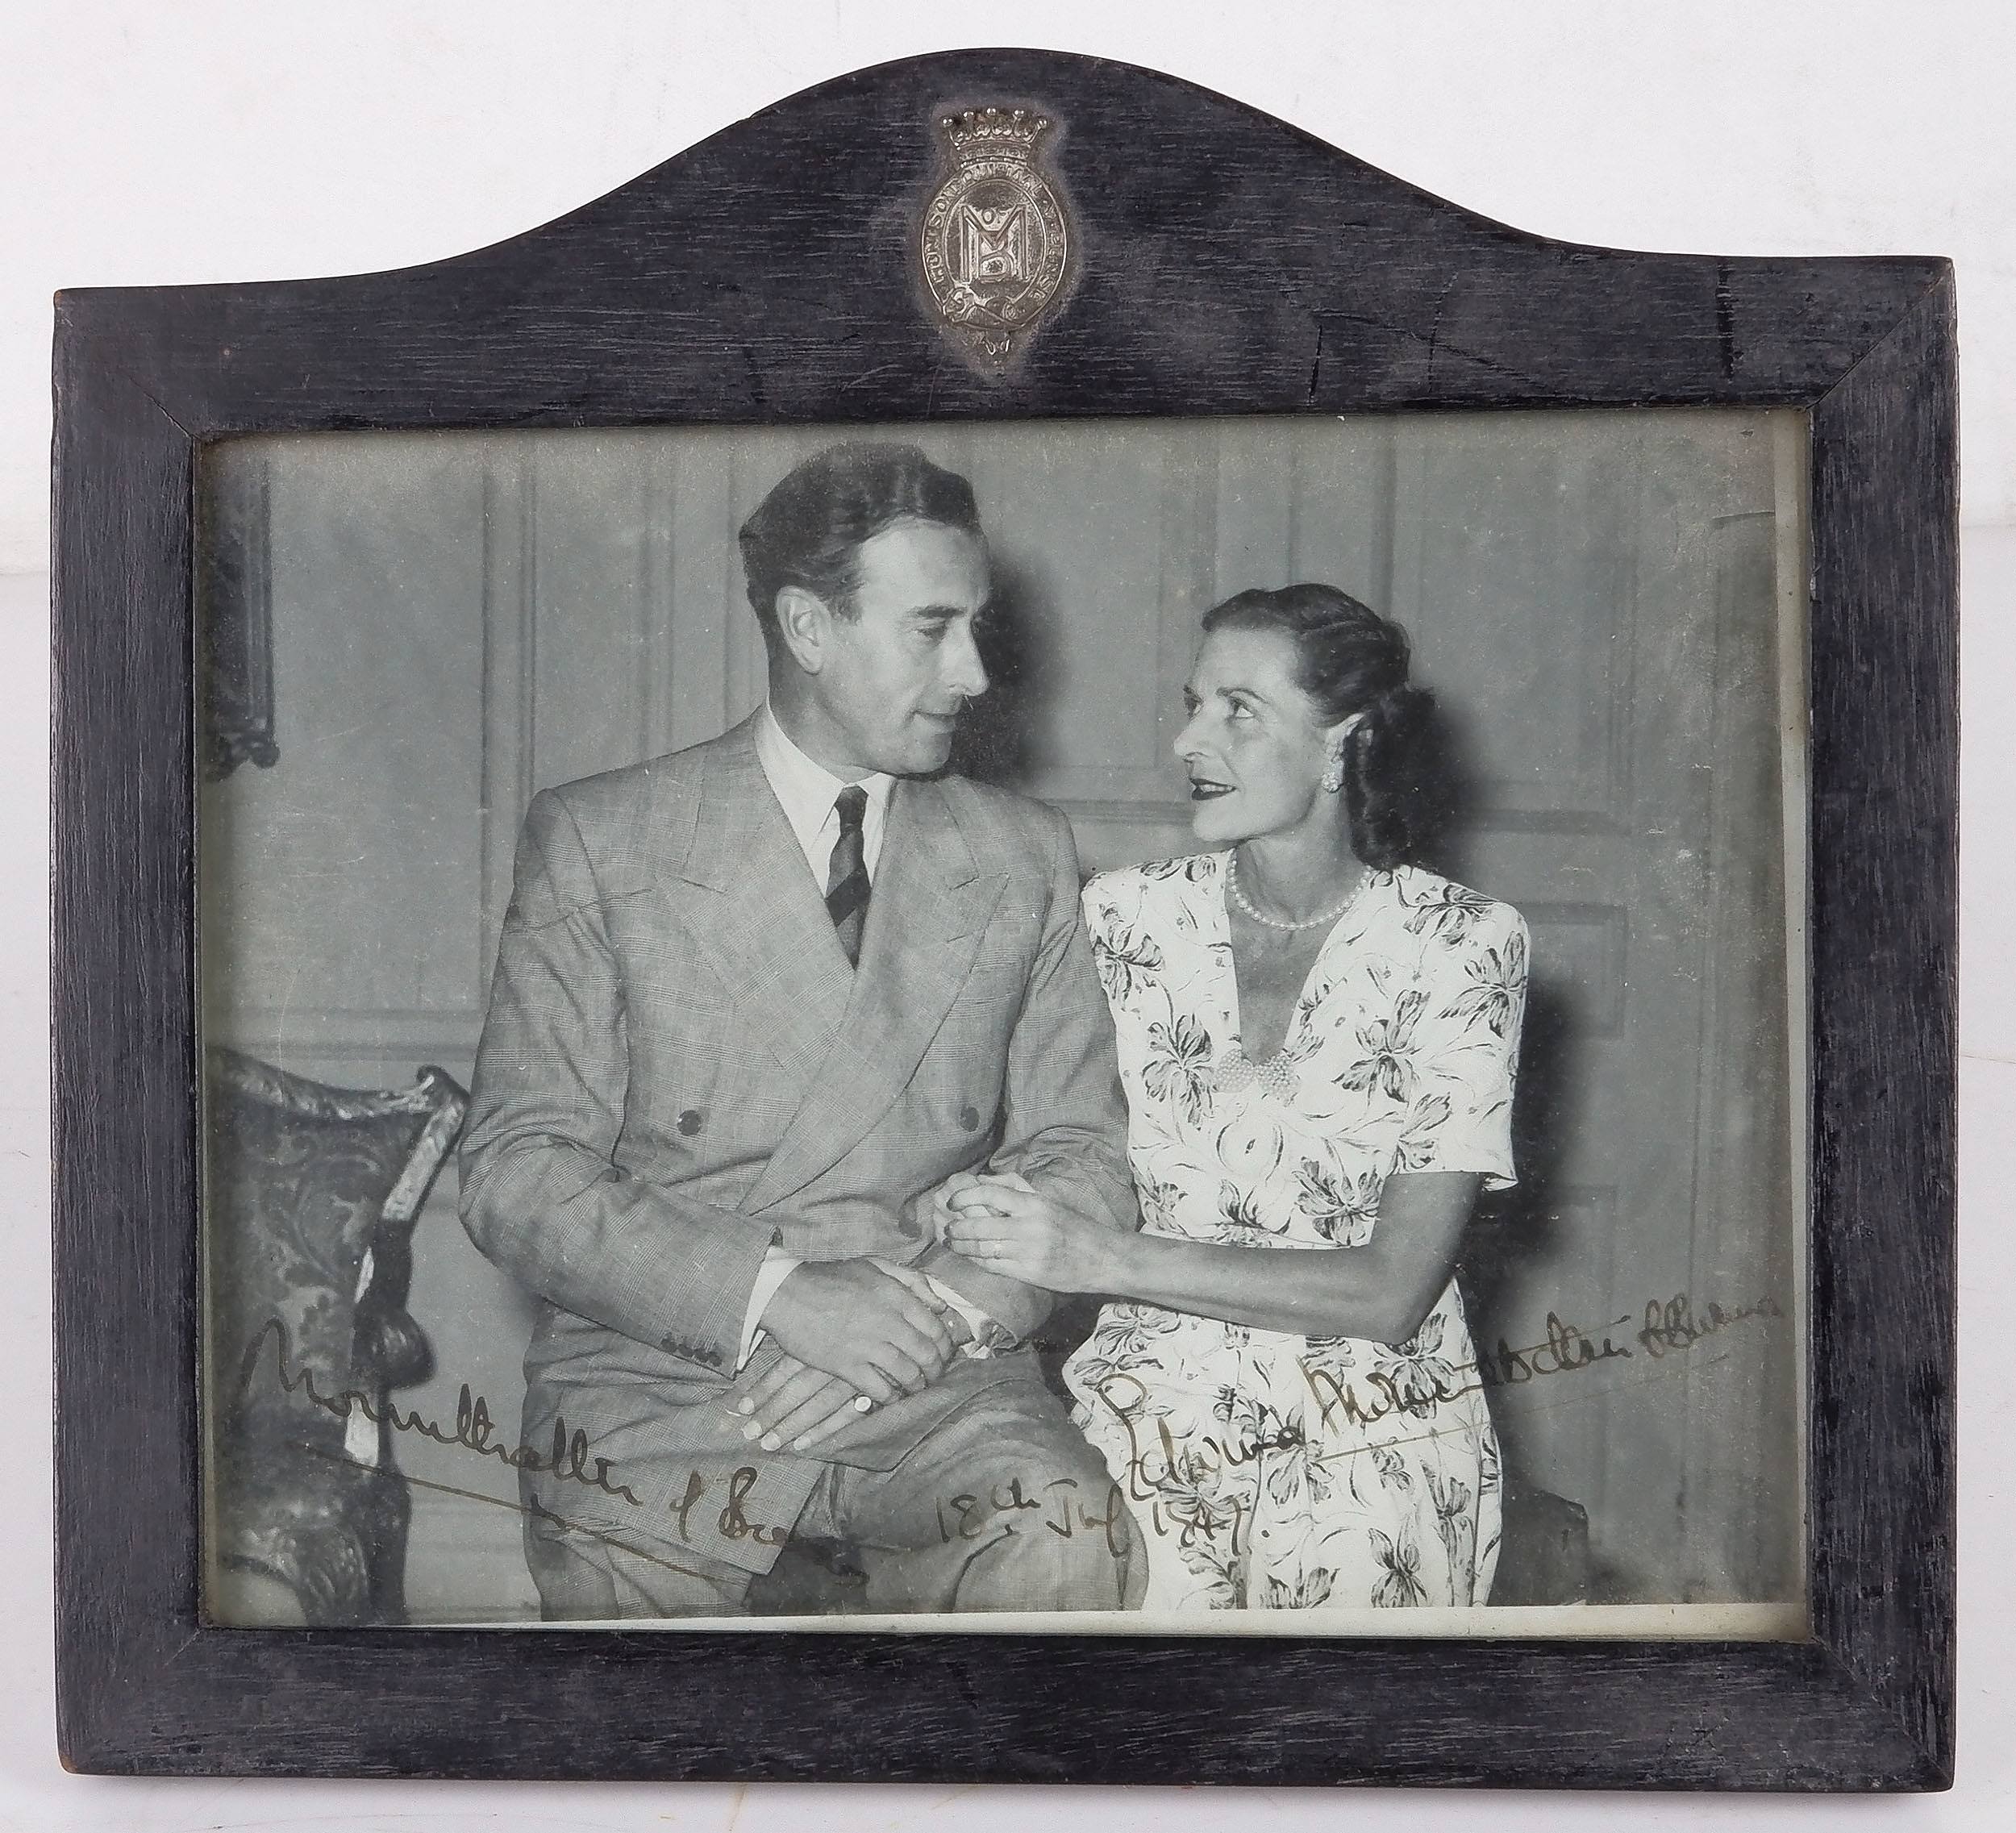 'Crested Signed Engagement Photo of Louis Mountbatten, 1st Earl Mountbatten of Burma and Countess Edwina Ashley, Ebonized Frame Crested with Mountabatten Arms'